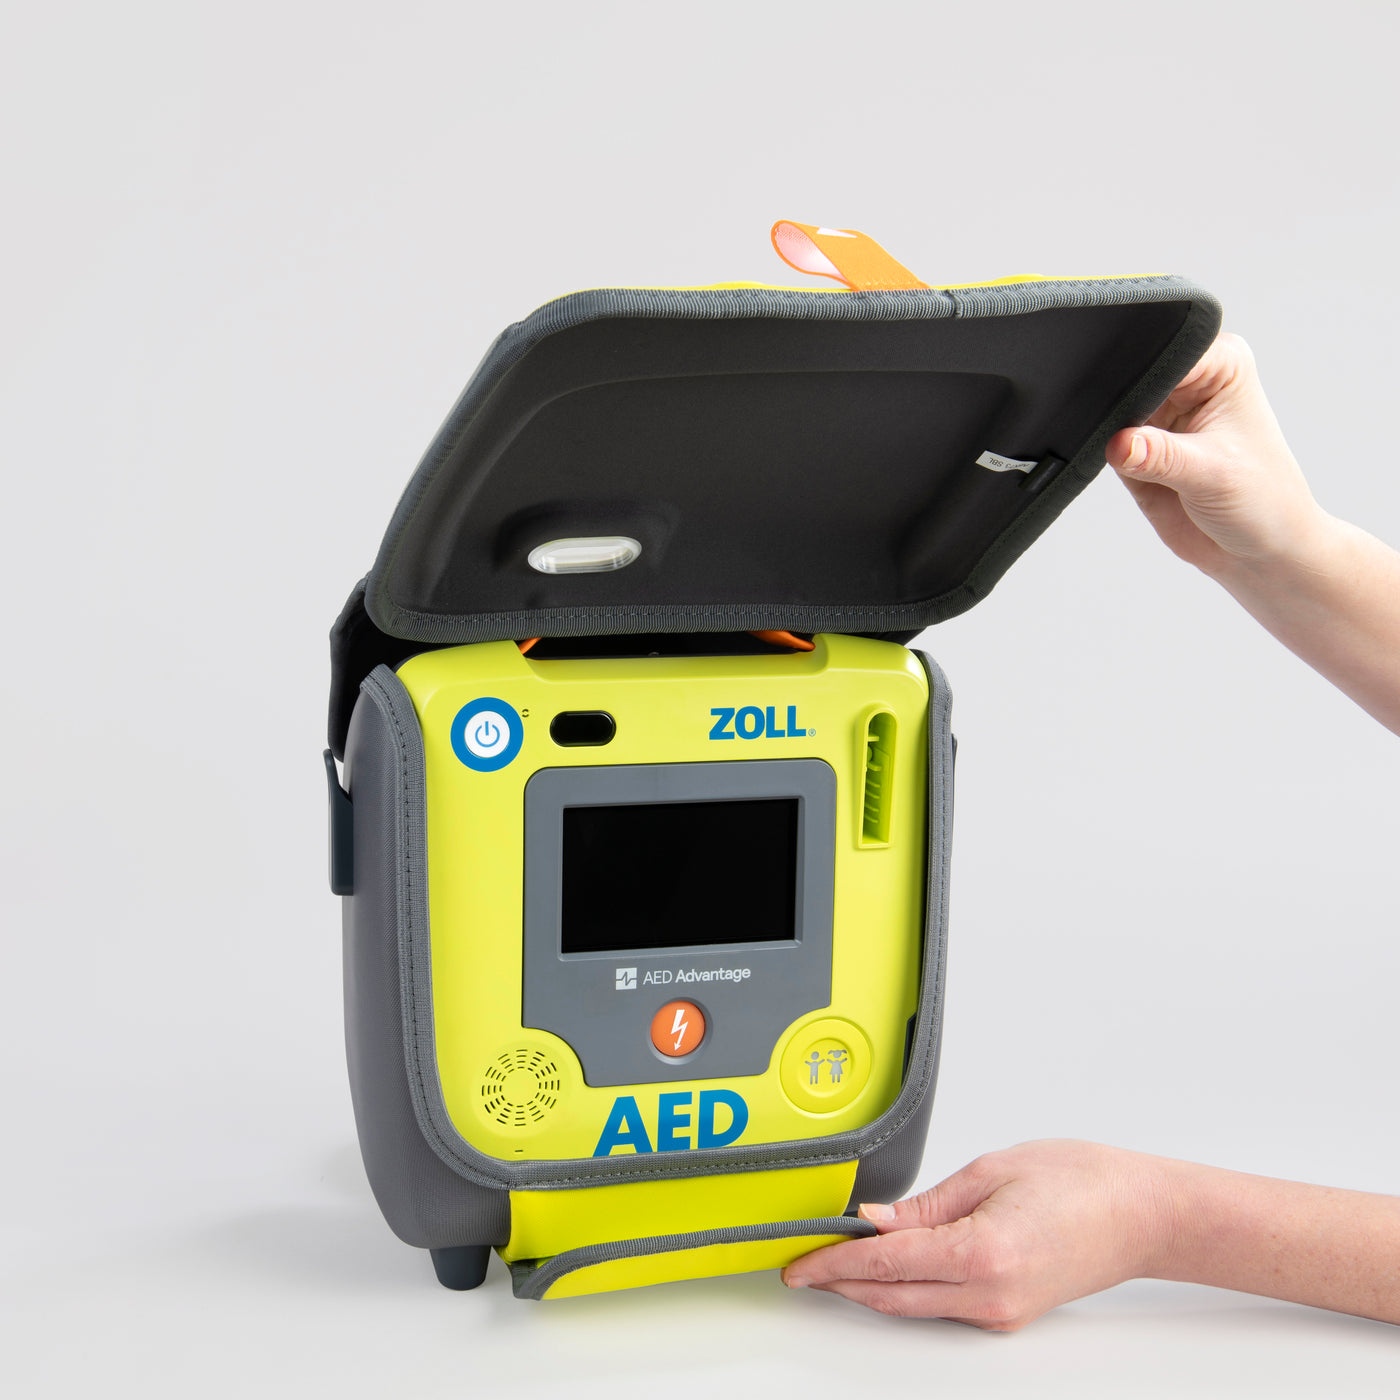 A bright green ZOLL defibrillator's carry case is being opened by hand to display the AED